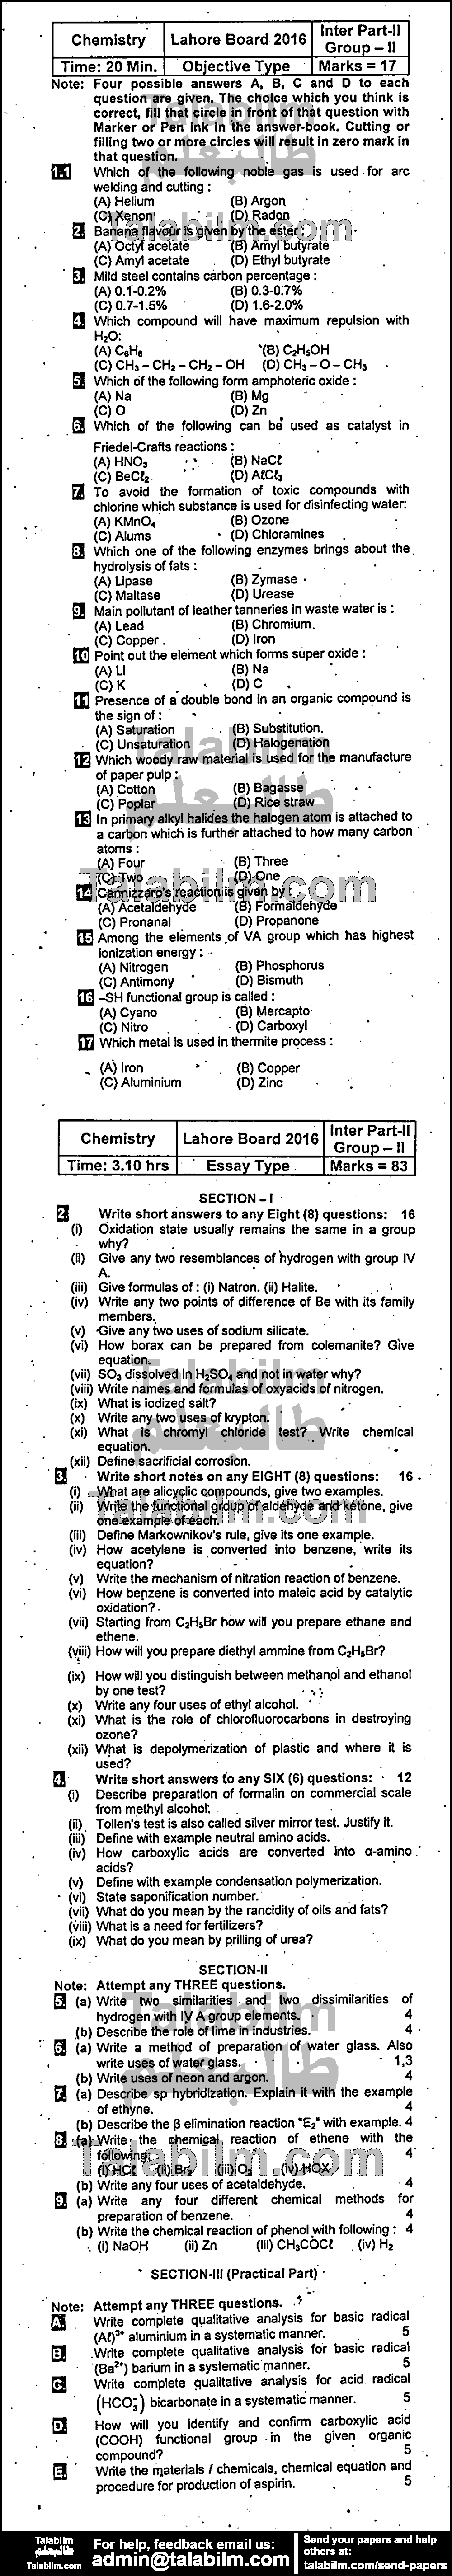 Chemistry 0 past paper for Group-II 2016